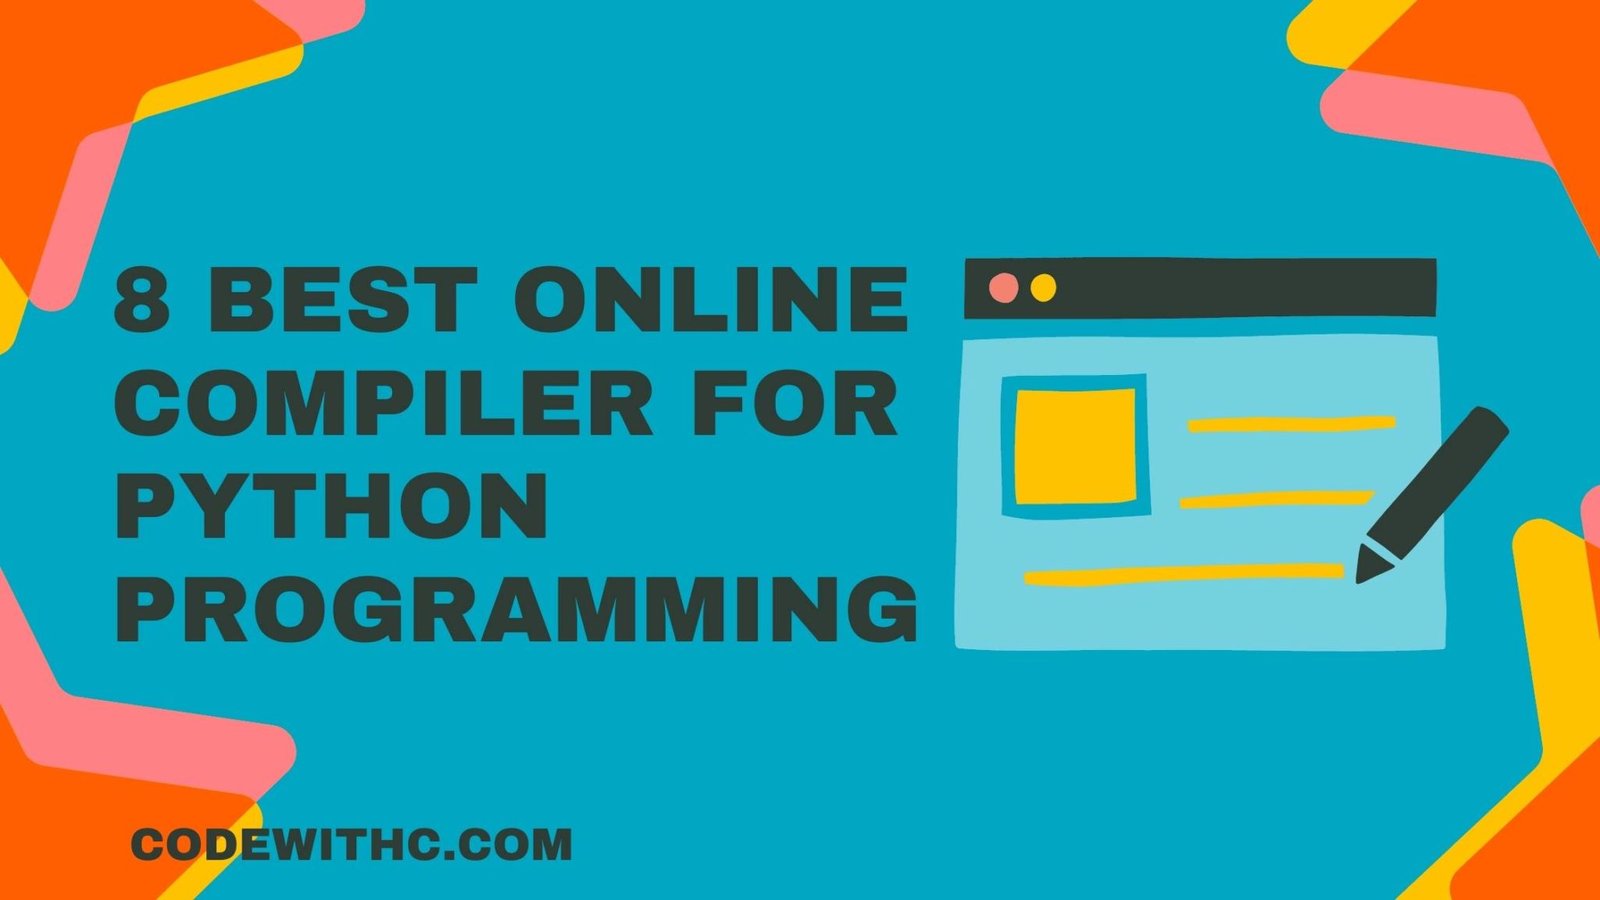 8 Best Python Online Compilers You Must Try Code With C